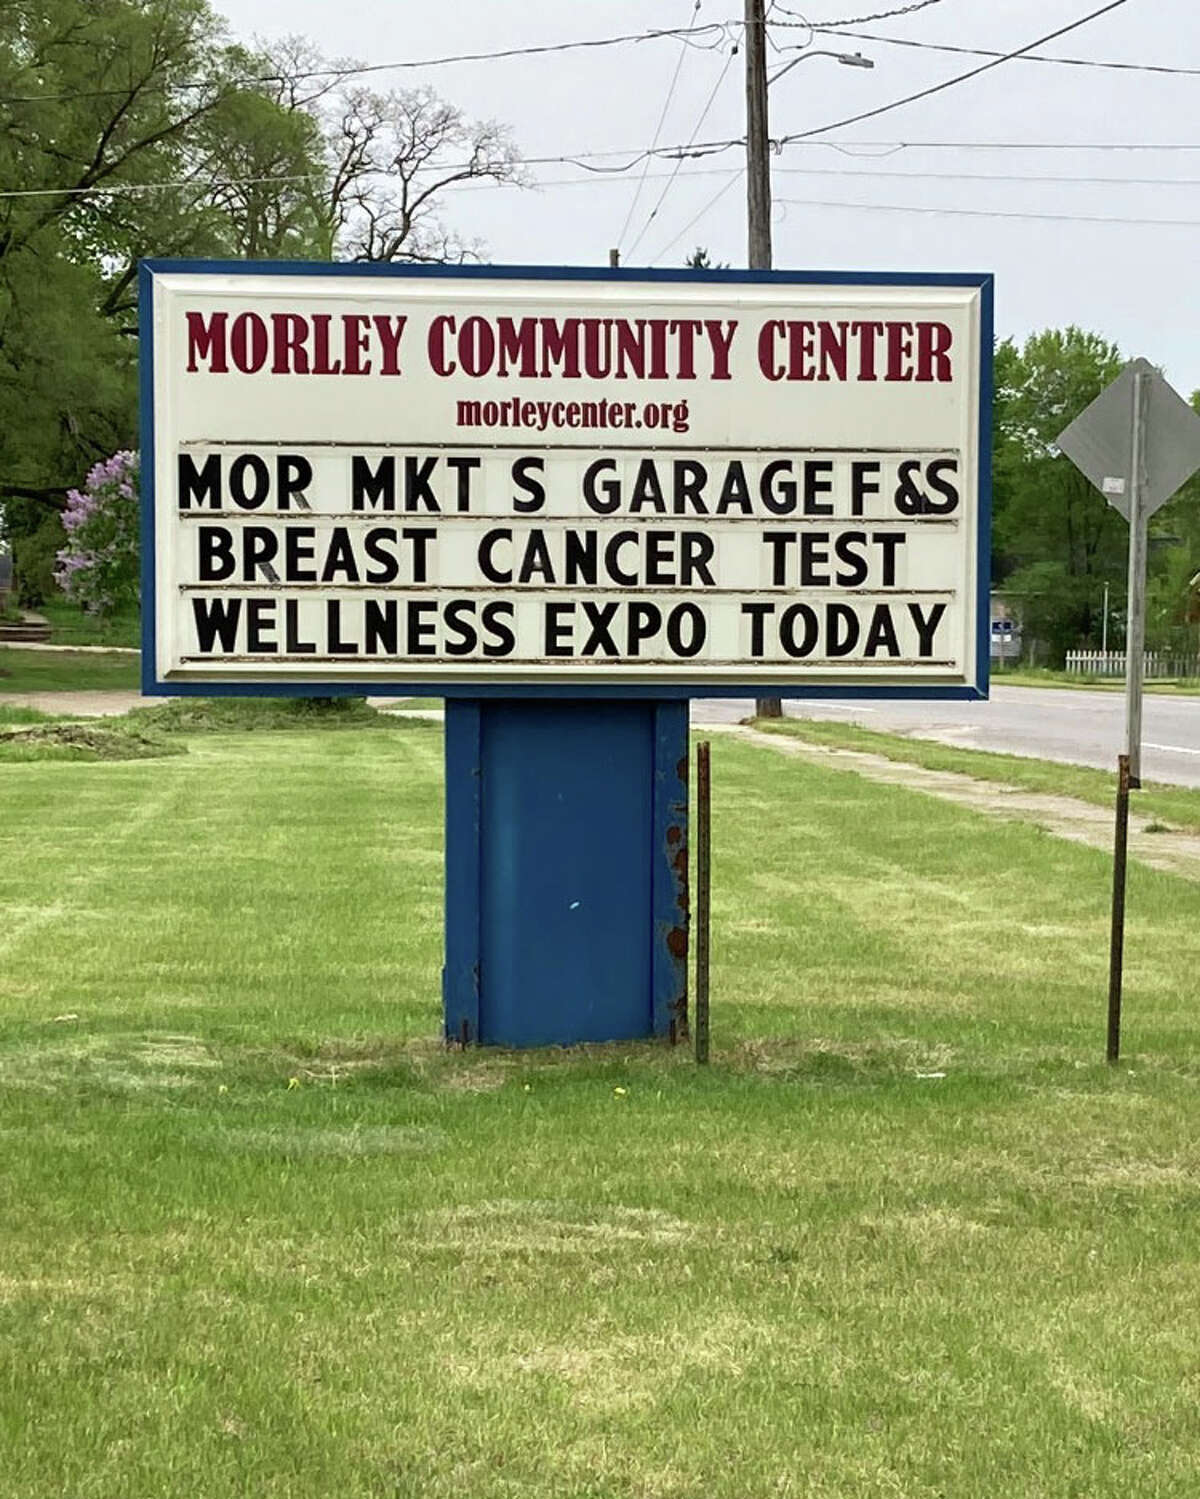 Morley Community Center recently hosted a Wellness Expo, in addition to its weekly Morley Market. The Spectrum Health Mobile Mammography unit was on hand to provide free mammograms to uninsured or underinsured women.